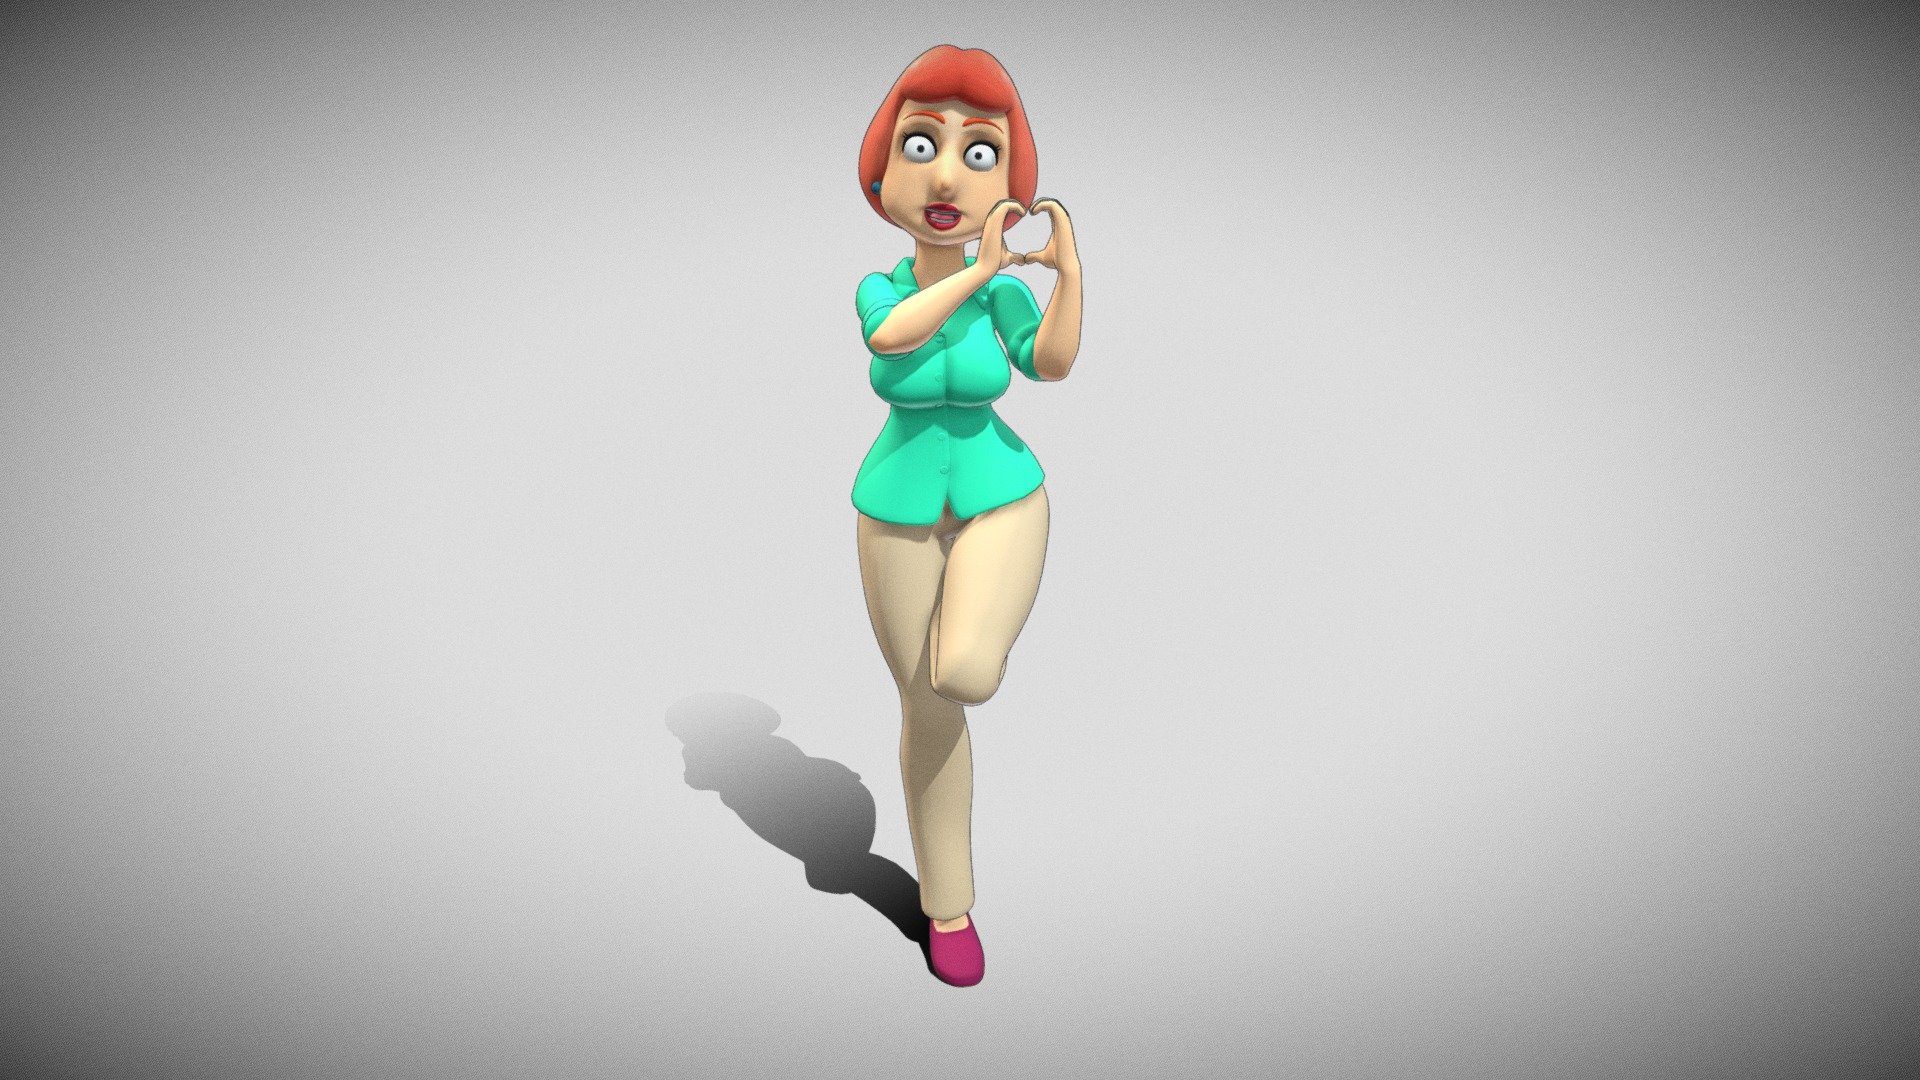 Lois Griffin S Instagram Twitter And Facebook On Idcrawl